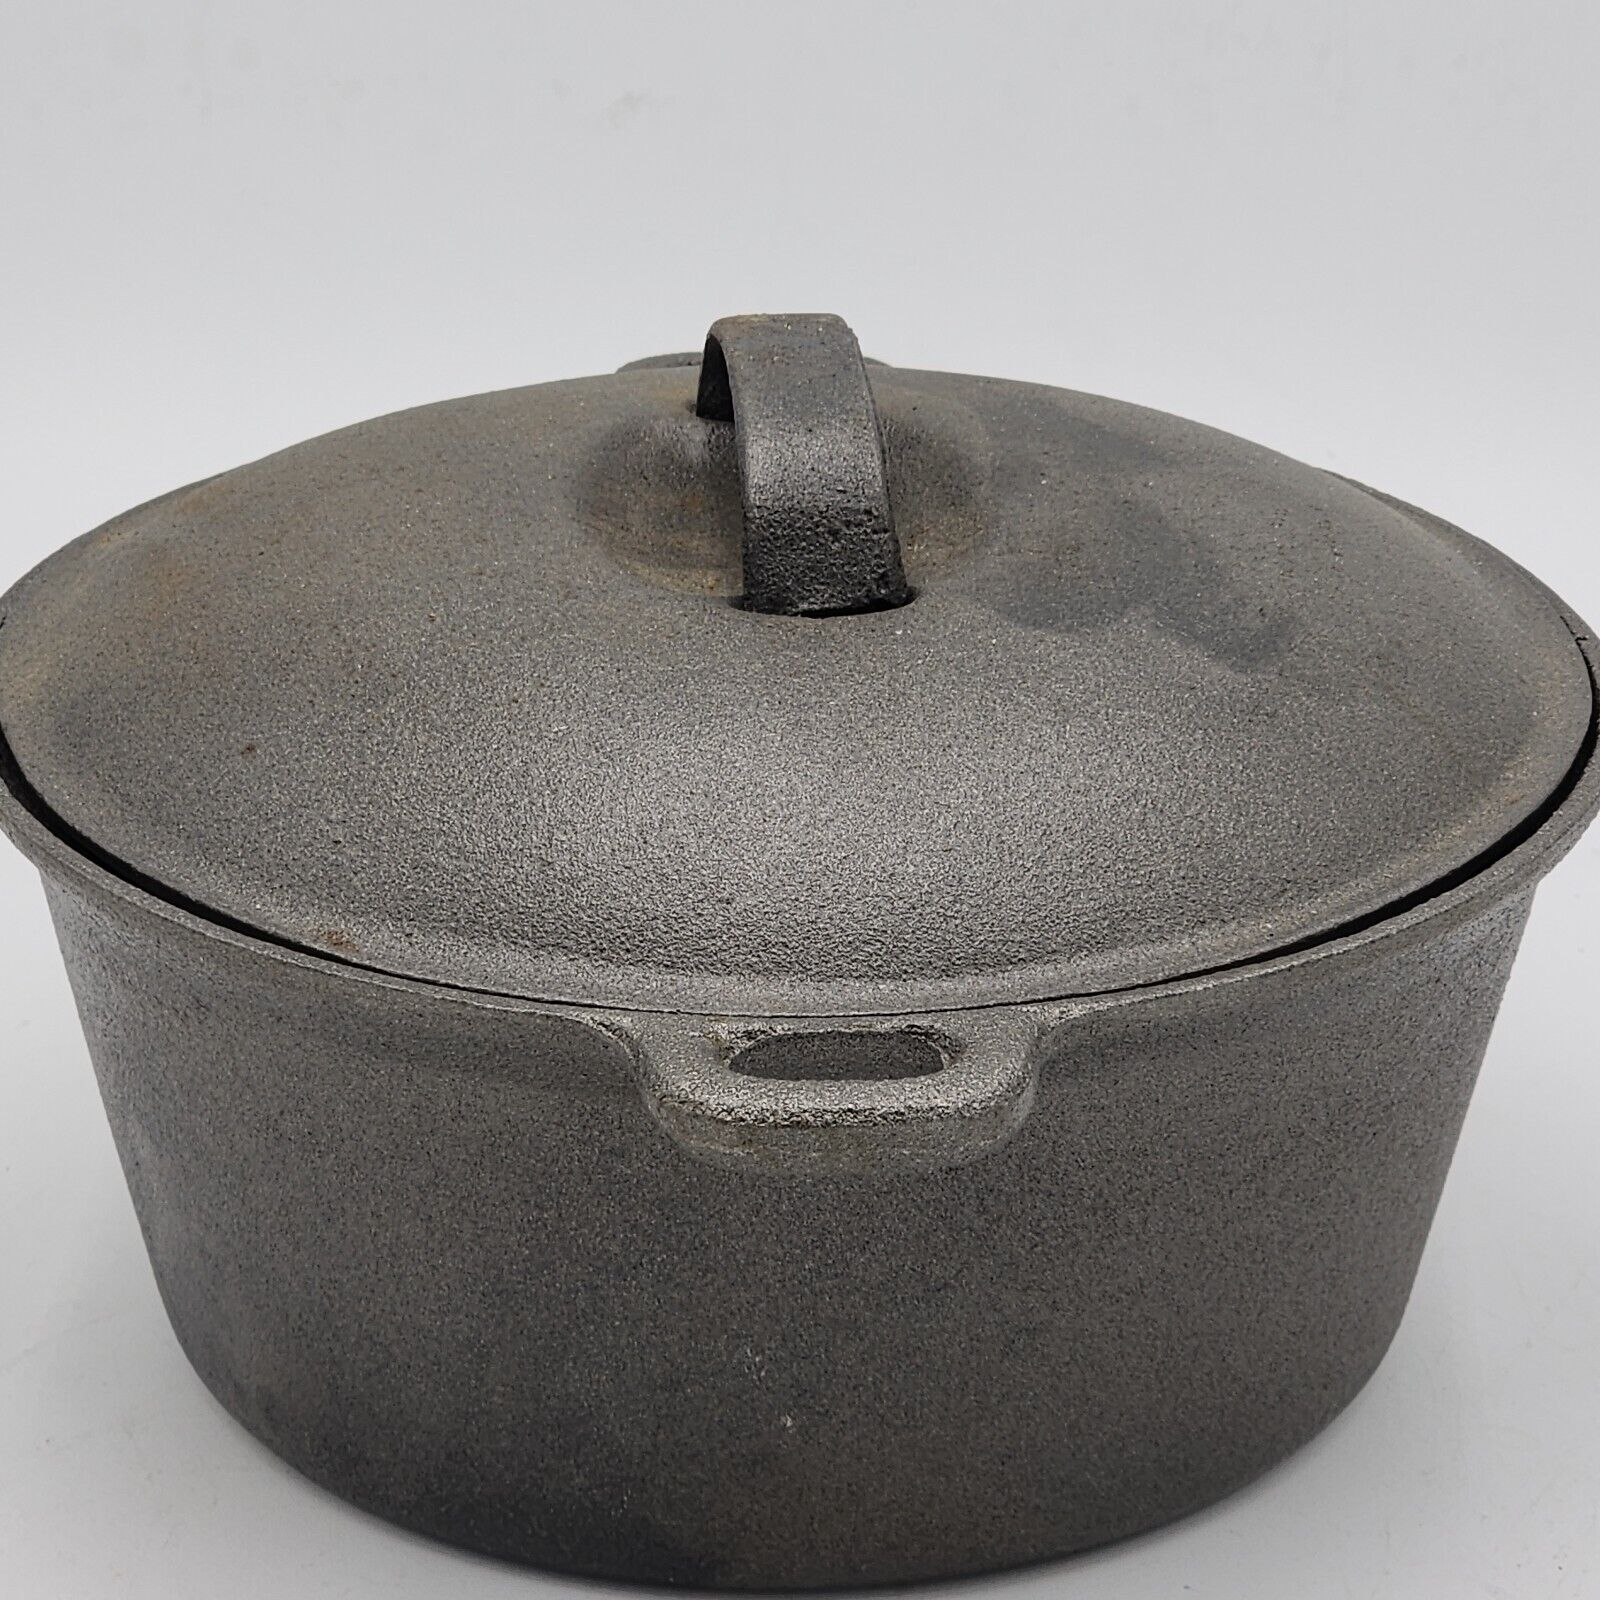 Vintage Cast Iron 4.5 Qt Quart Dutch Oven Cooking Pot and Lid Made in Taiwan